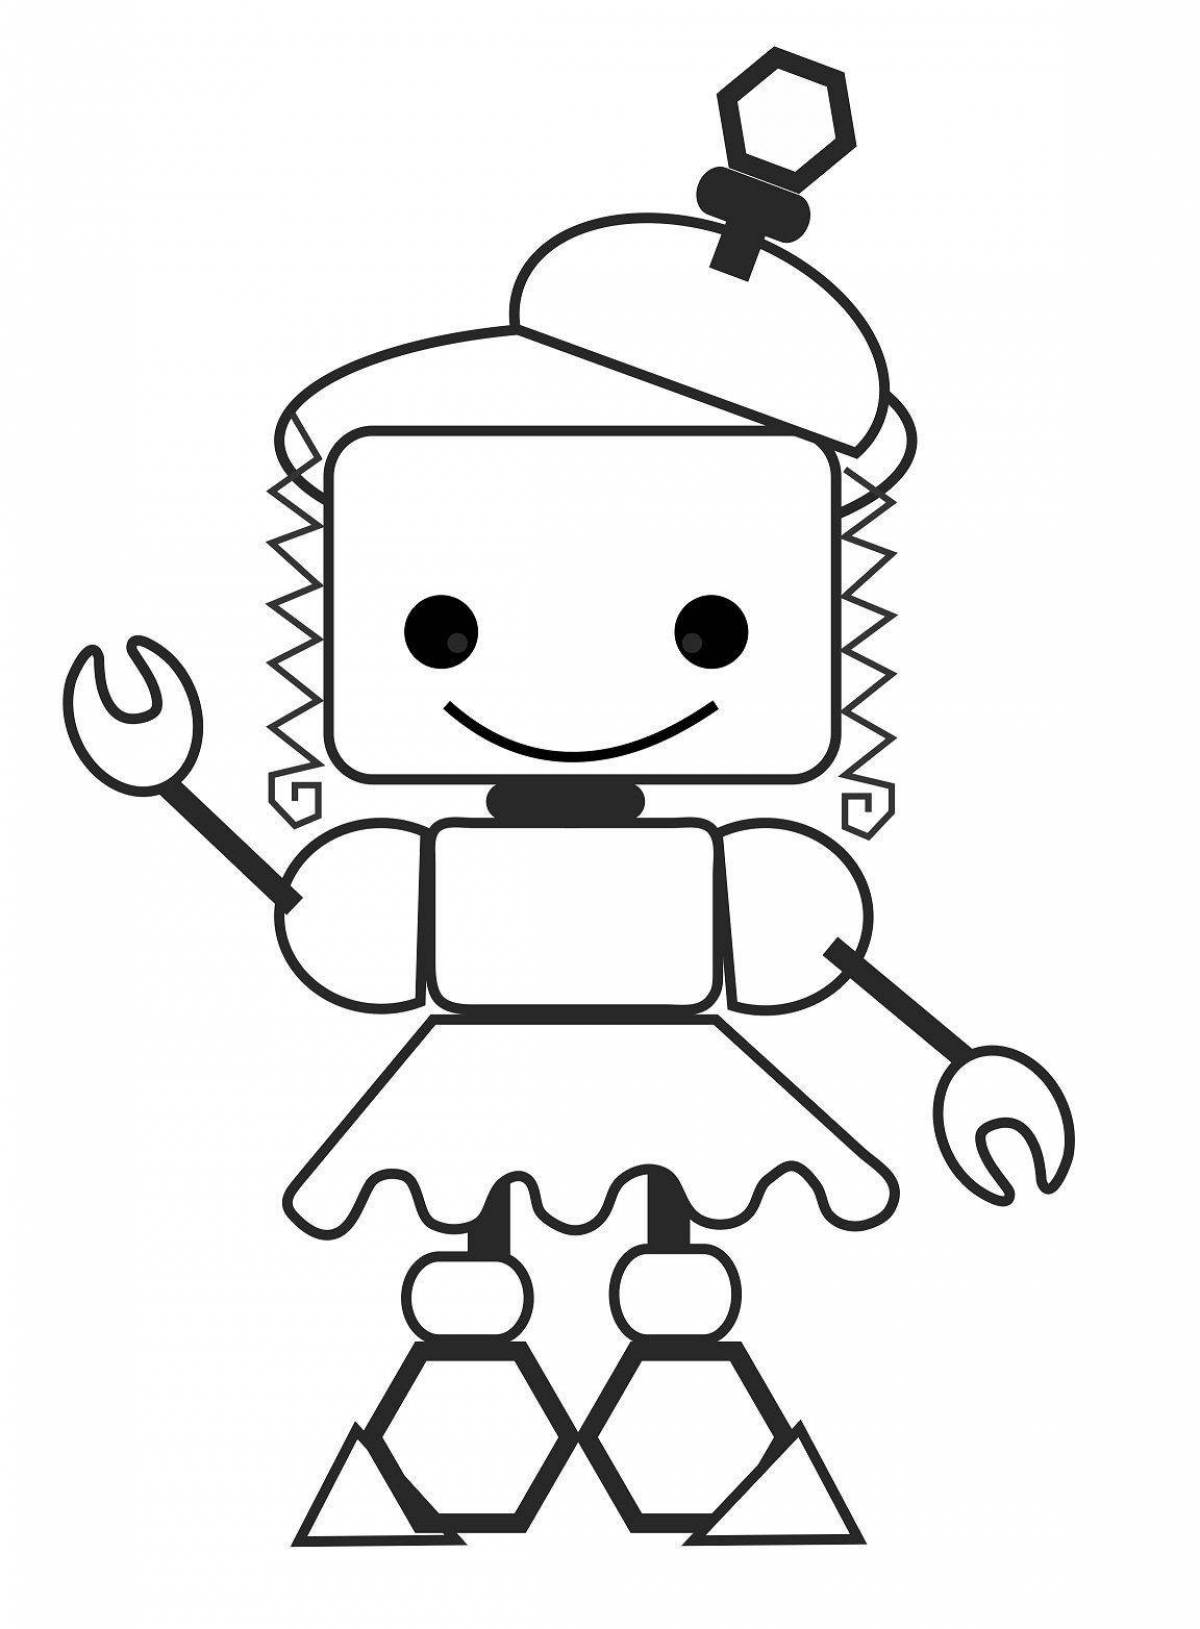 Colorful robot girl coloring page